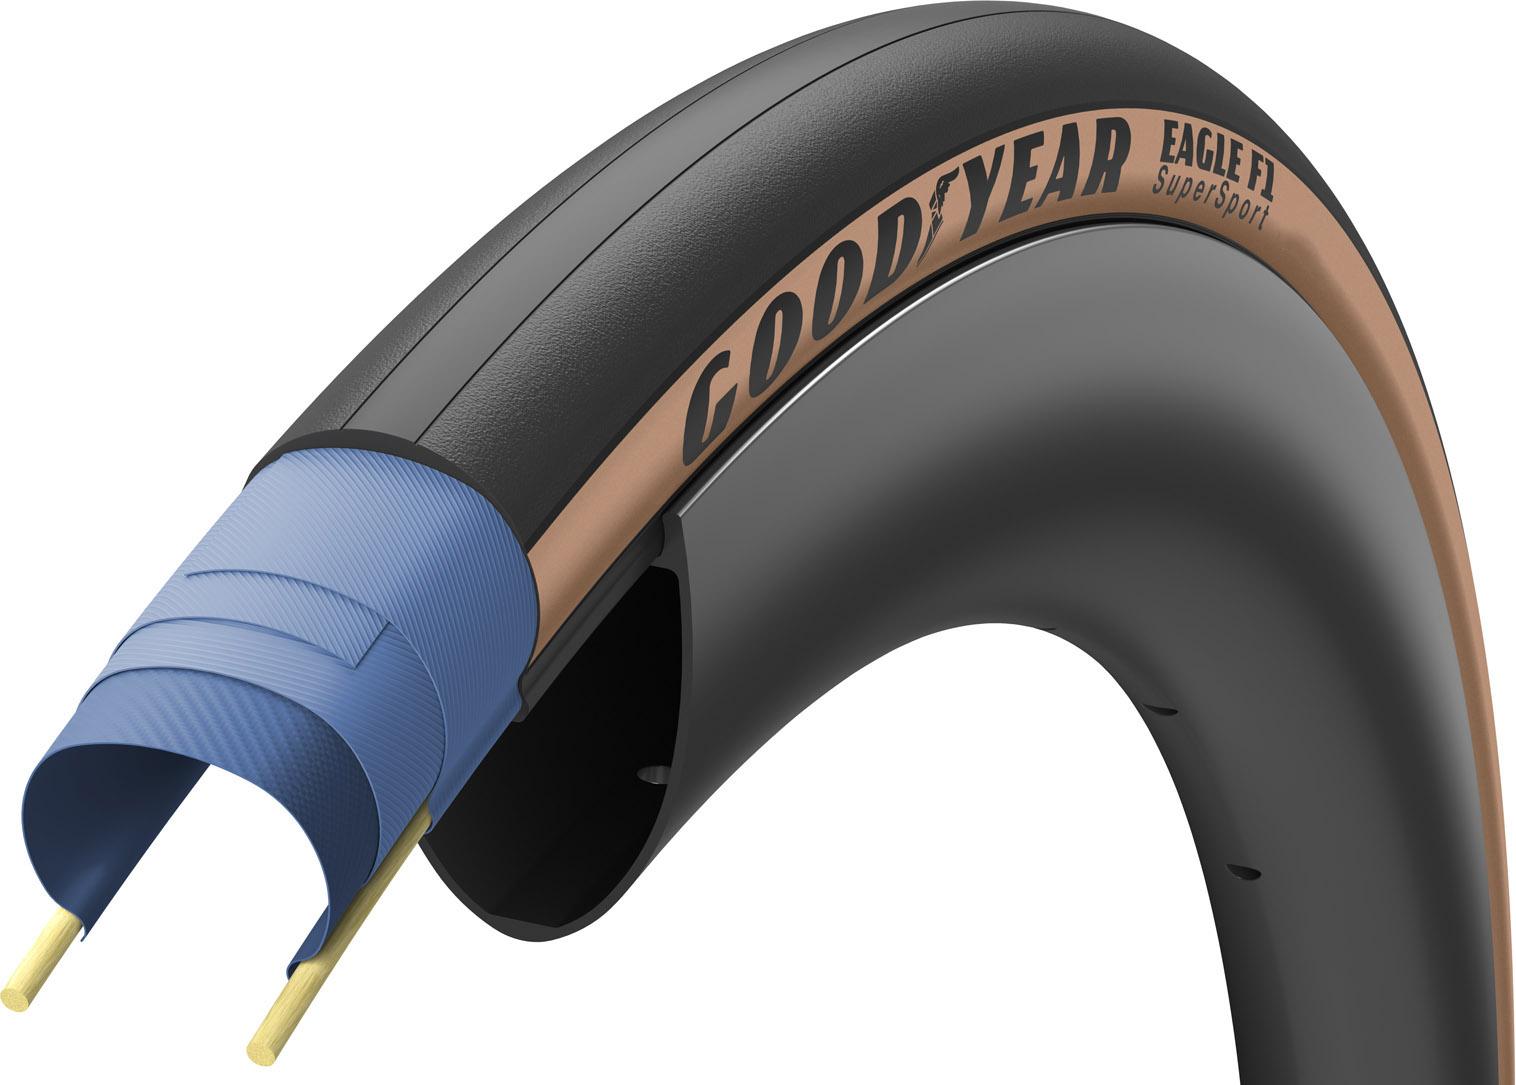 Goodyear Eagle F1 Supersport Road Tyre - Black/tan Wall